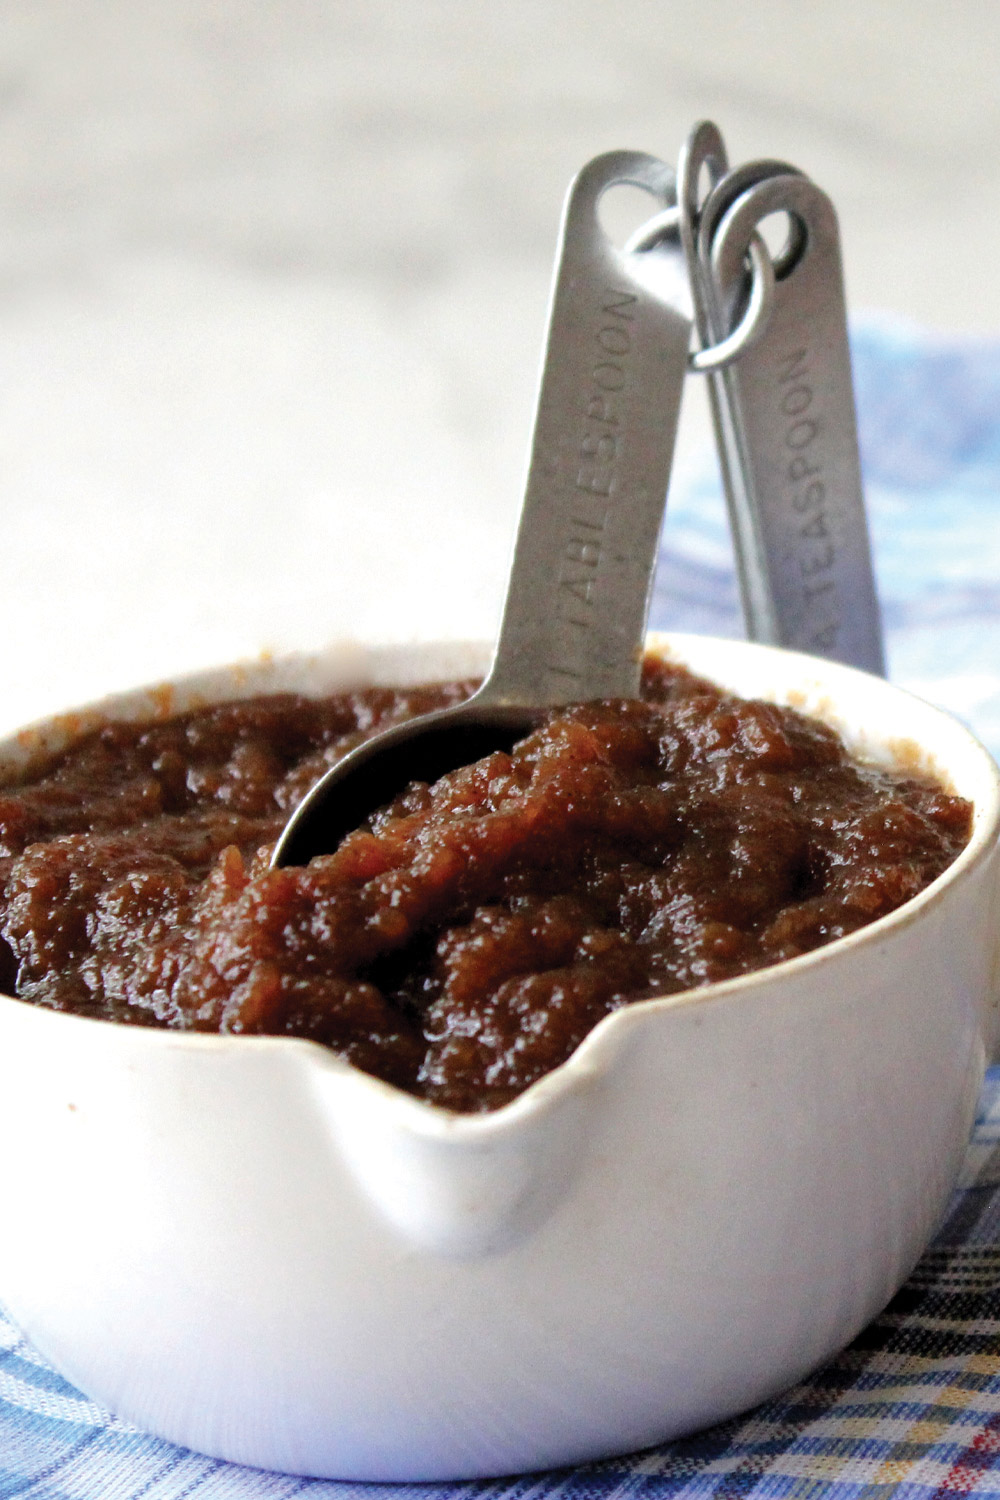 Measuring cup full of apple butter with measuring spoon standing in the thick brown apple butter